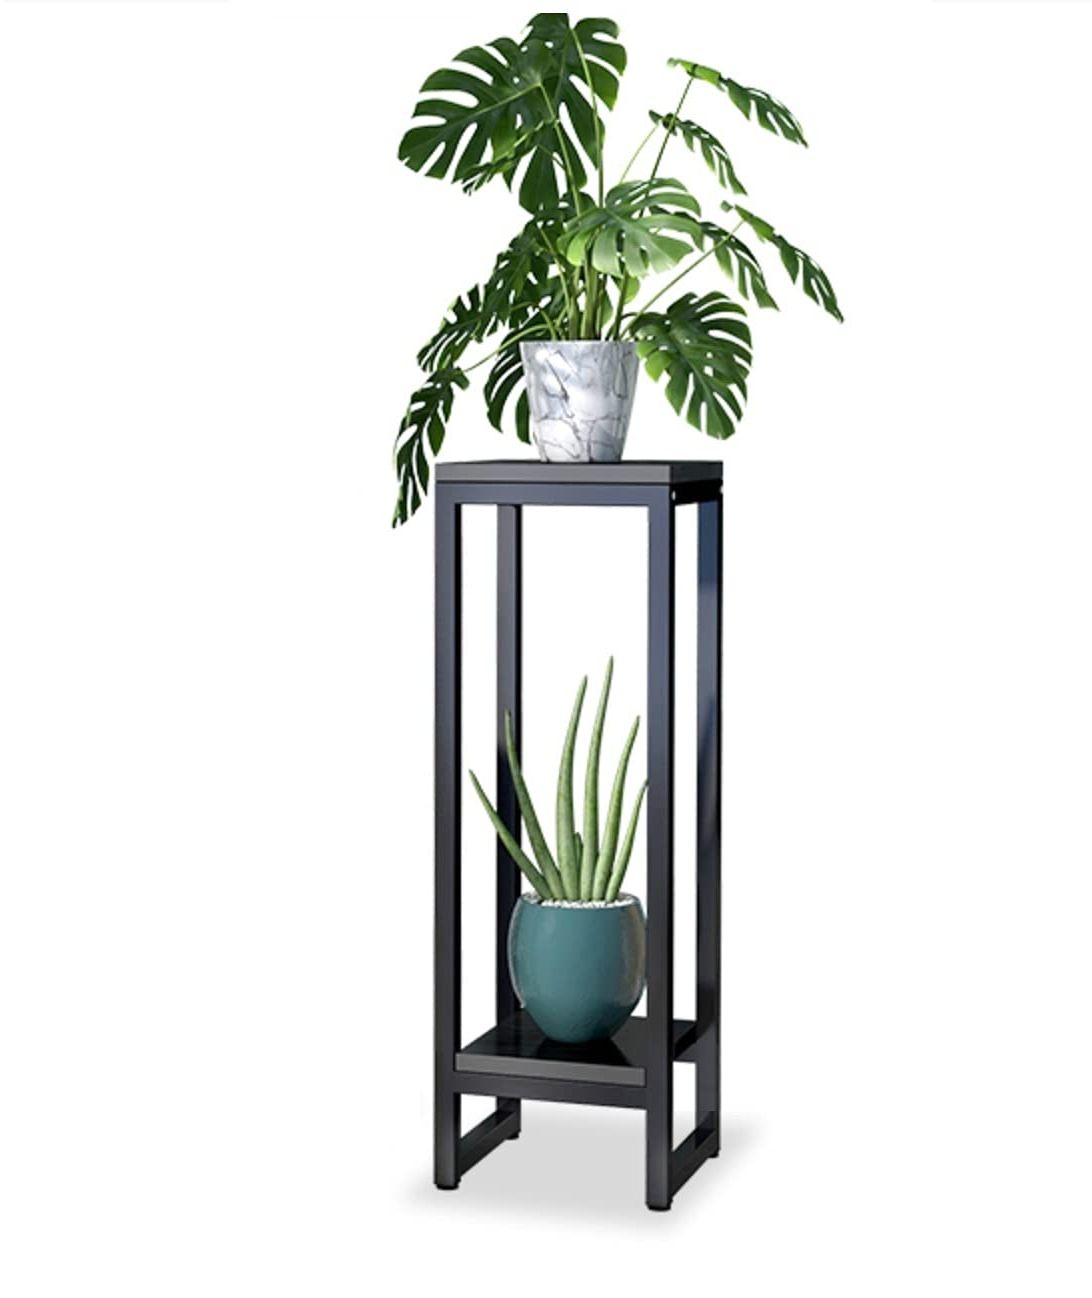 Two Tier Plant Stands Pertaining To Well Known Amazon: Weenine 37 Inches Metal Tall Plant Stand Rack, 2 Tier Plant  Shelves Indoor Flower Pots Stand Holder Planter Display For Living Room  Balcony Garden (style B2 ) : Patio, Lawn & Garden (View 1 of 10)